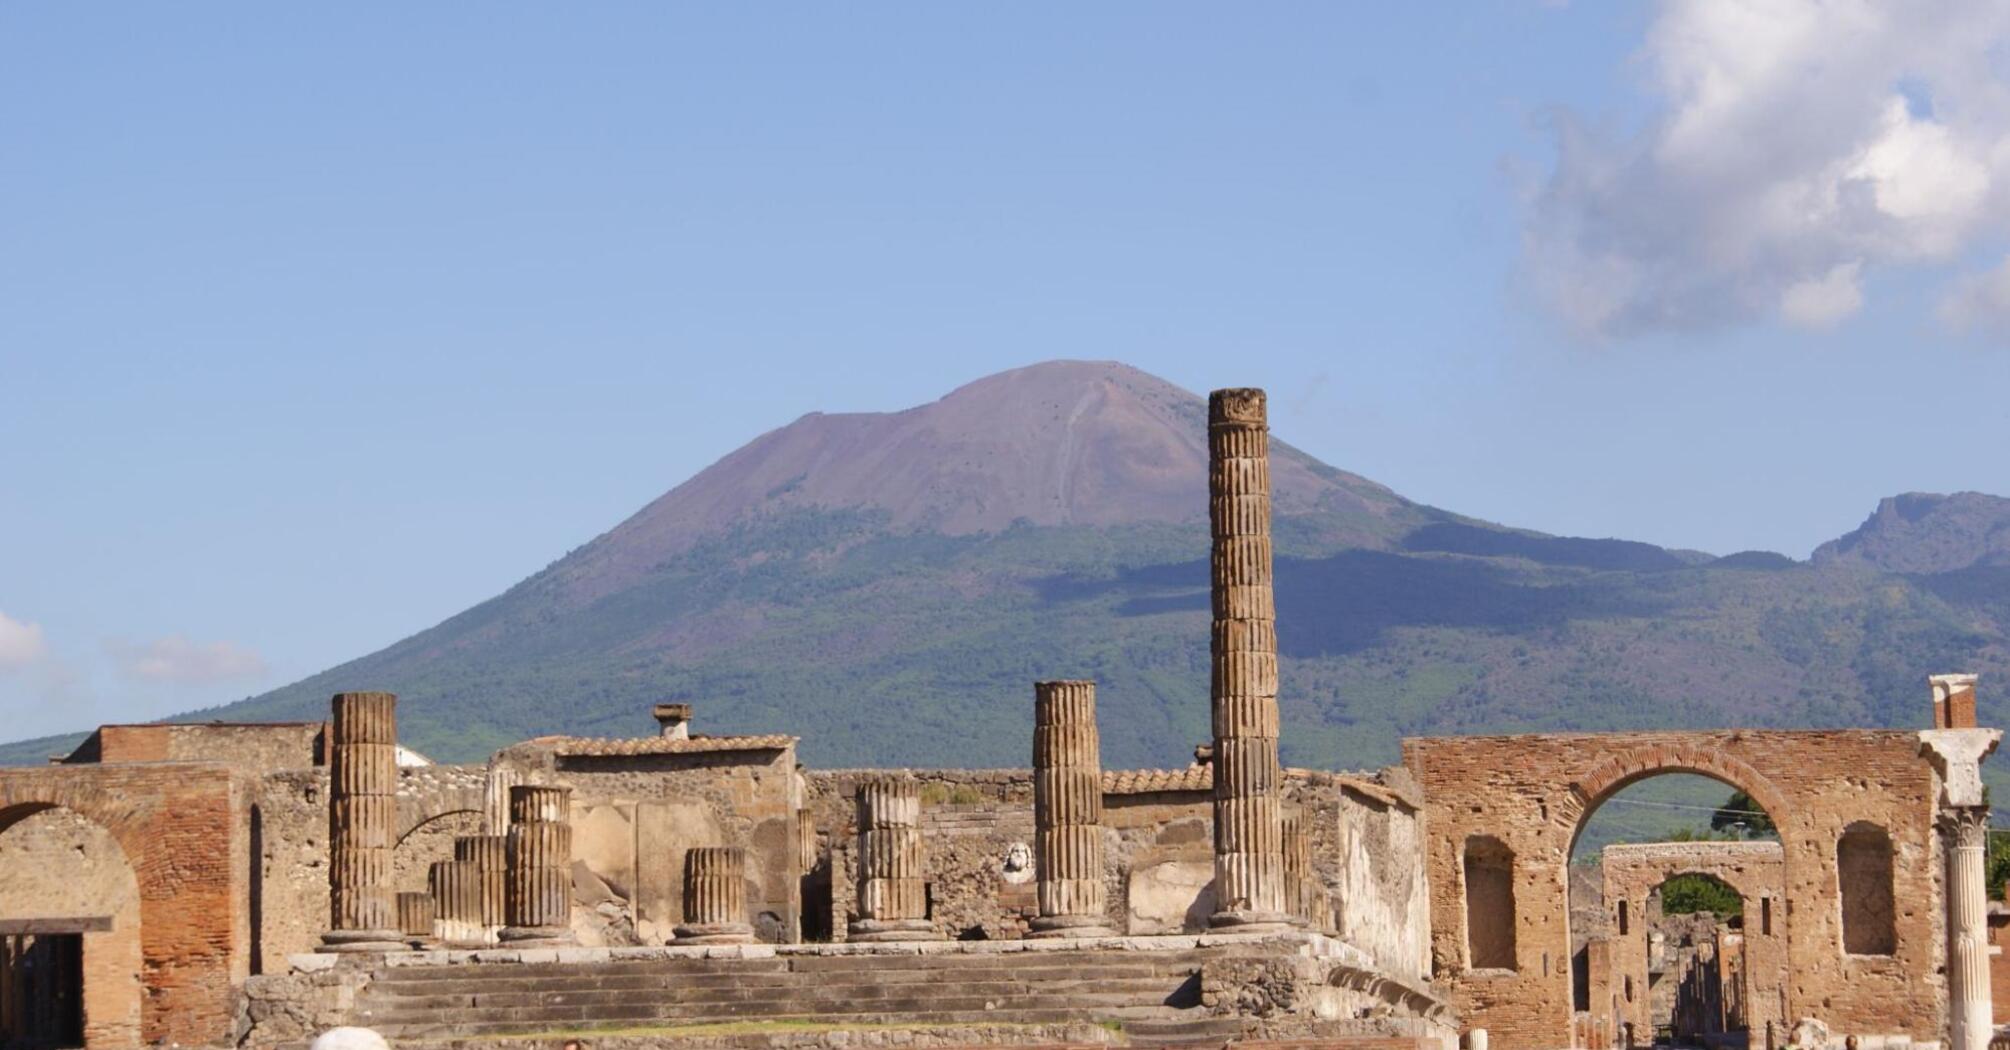 Ruins of ancient city Pompei, about 2,000 years old